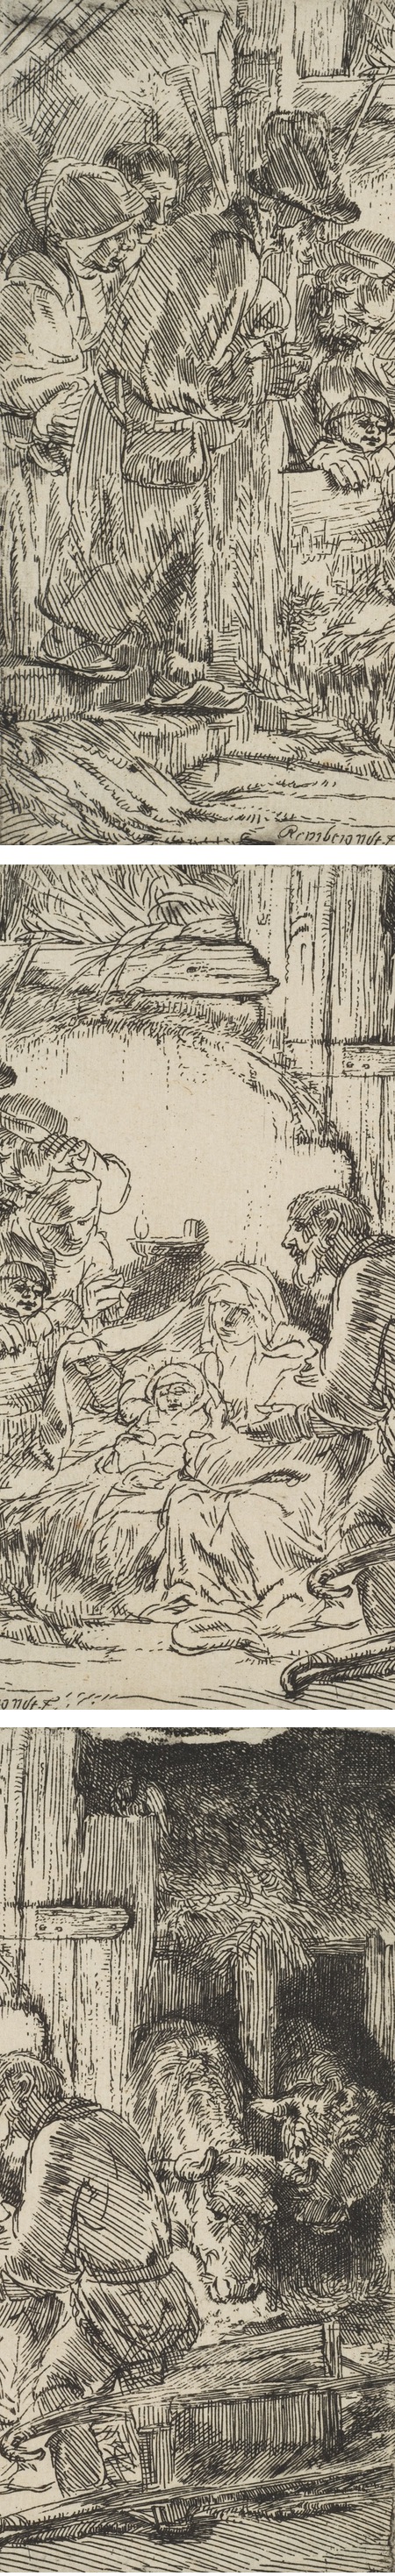 The Adoration of the Shepherds, with the lamp, Rembrandt van Rijn, etching (details)